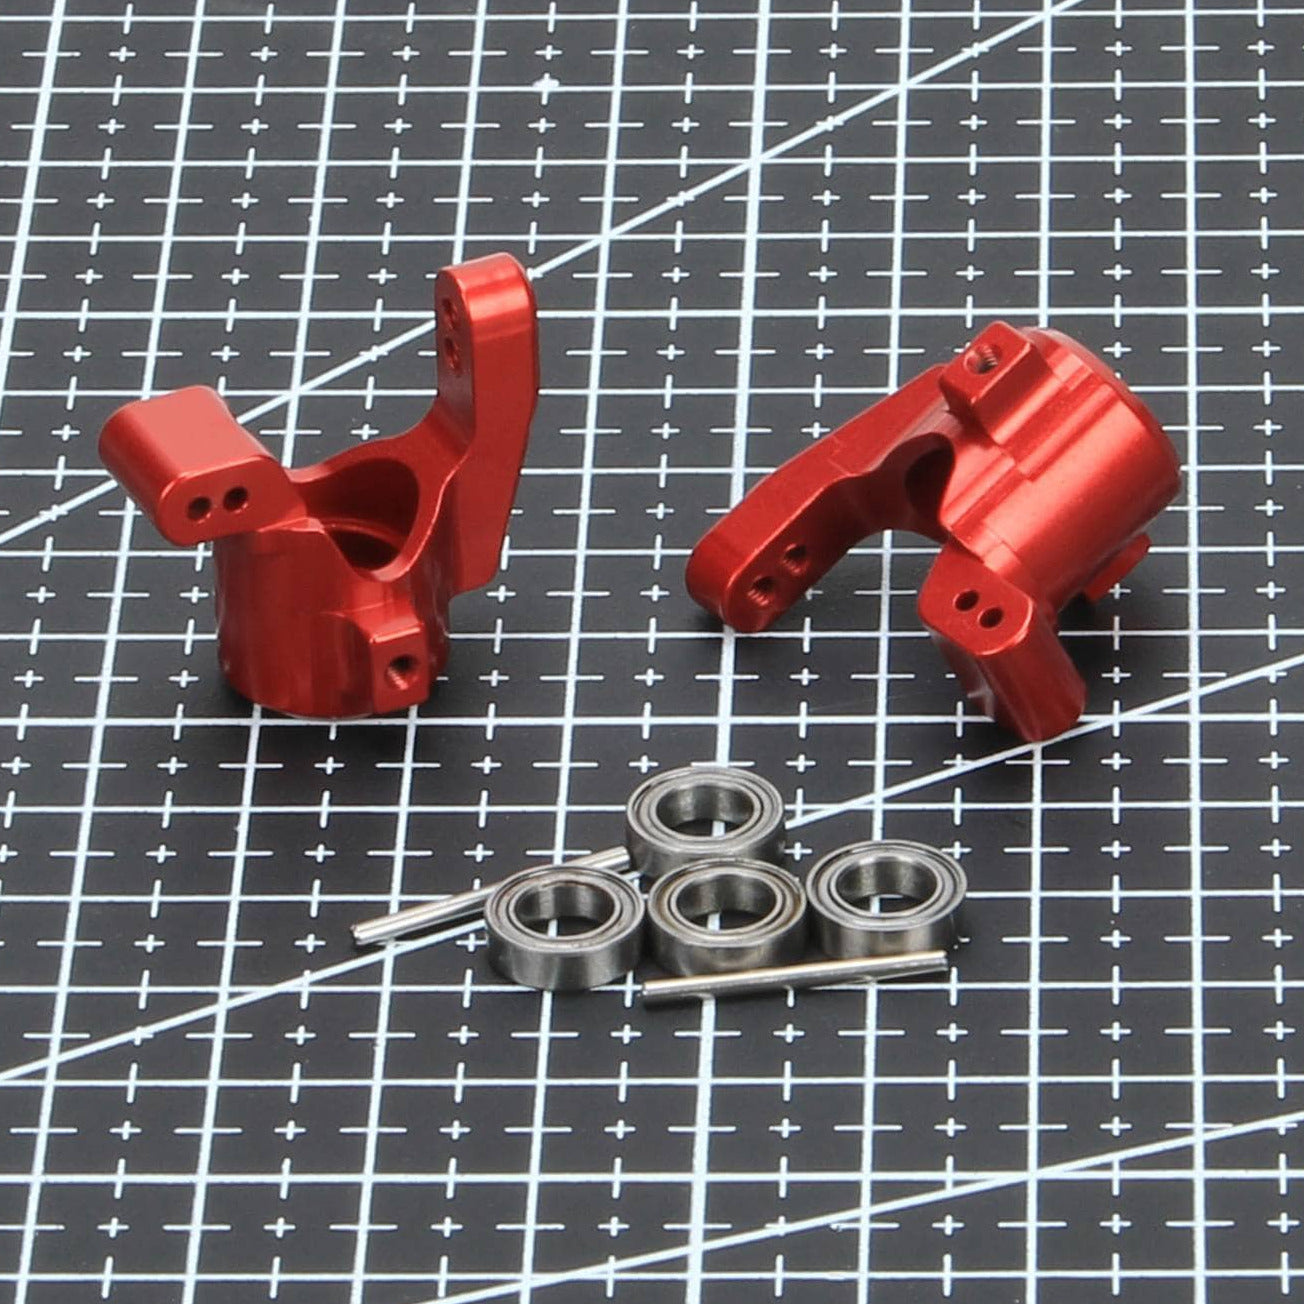 RCAWD TRAXXAS SLASH Red RCAWD RC Aluminum Carriers Stub Axle 2pcs for 1/18 Traxxas Upgrade Parts